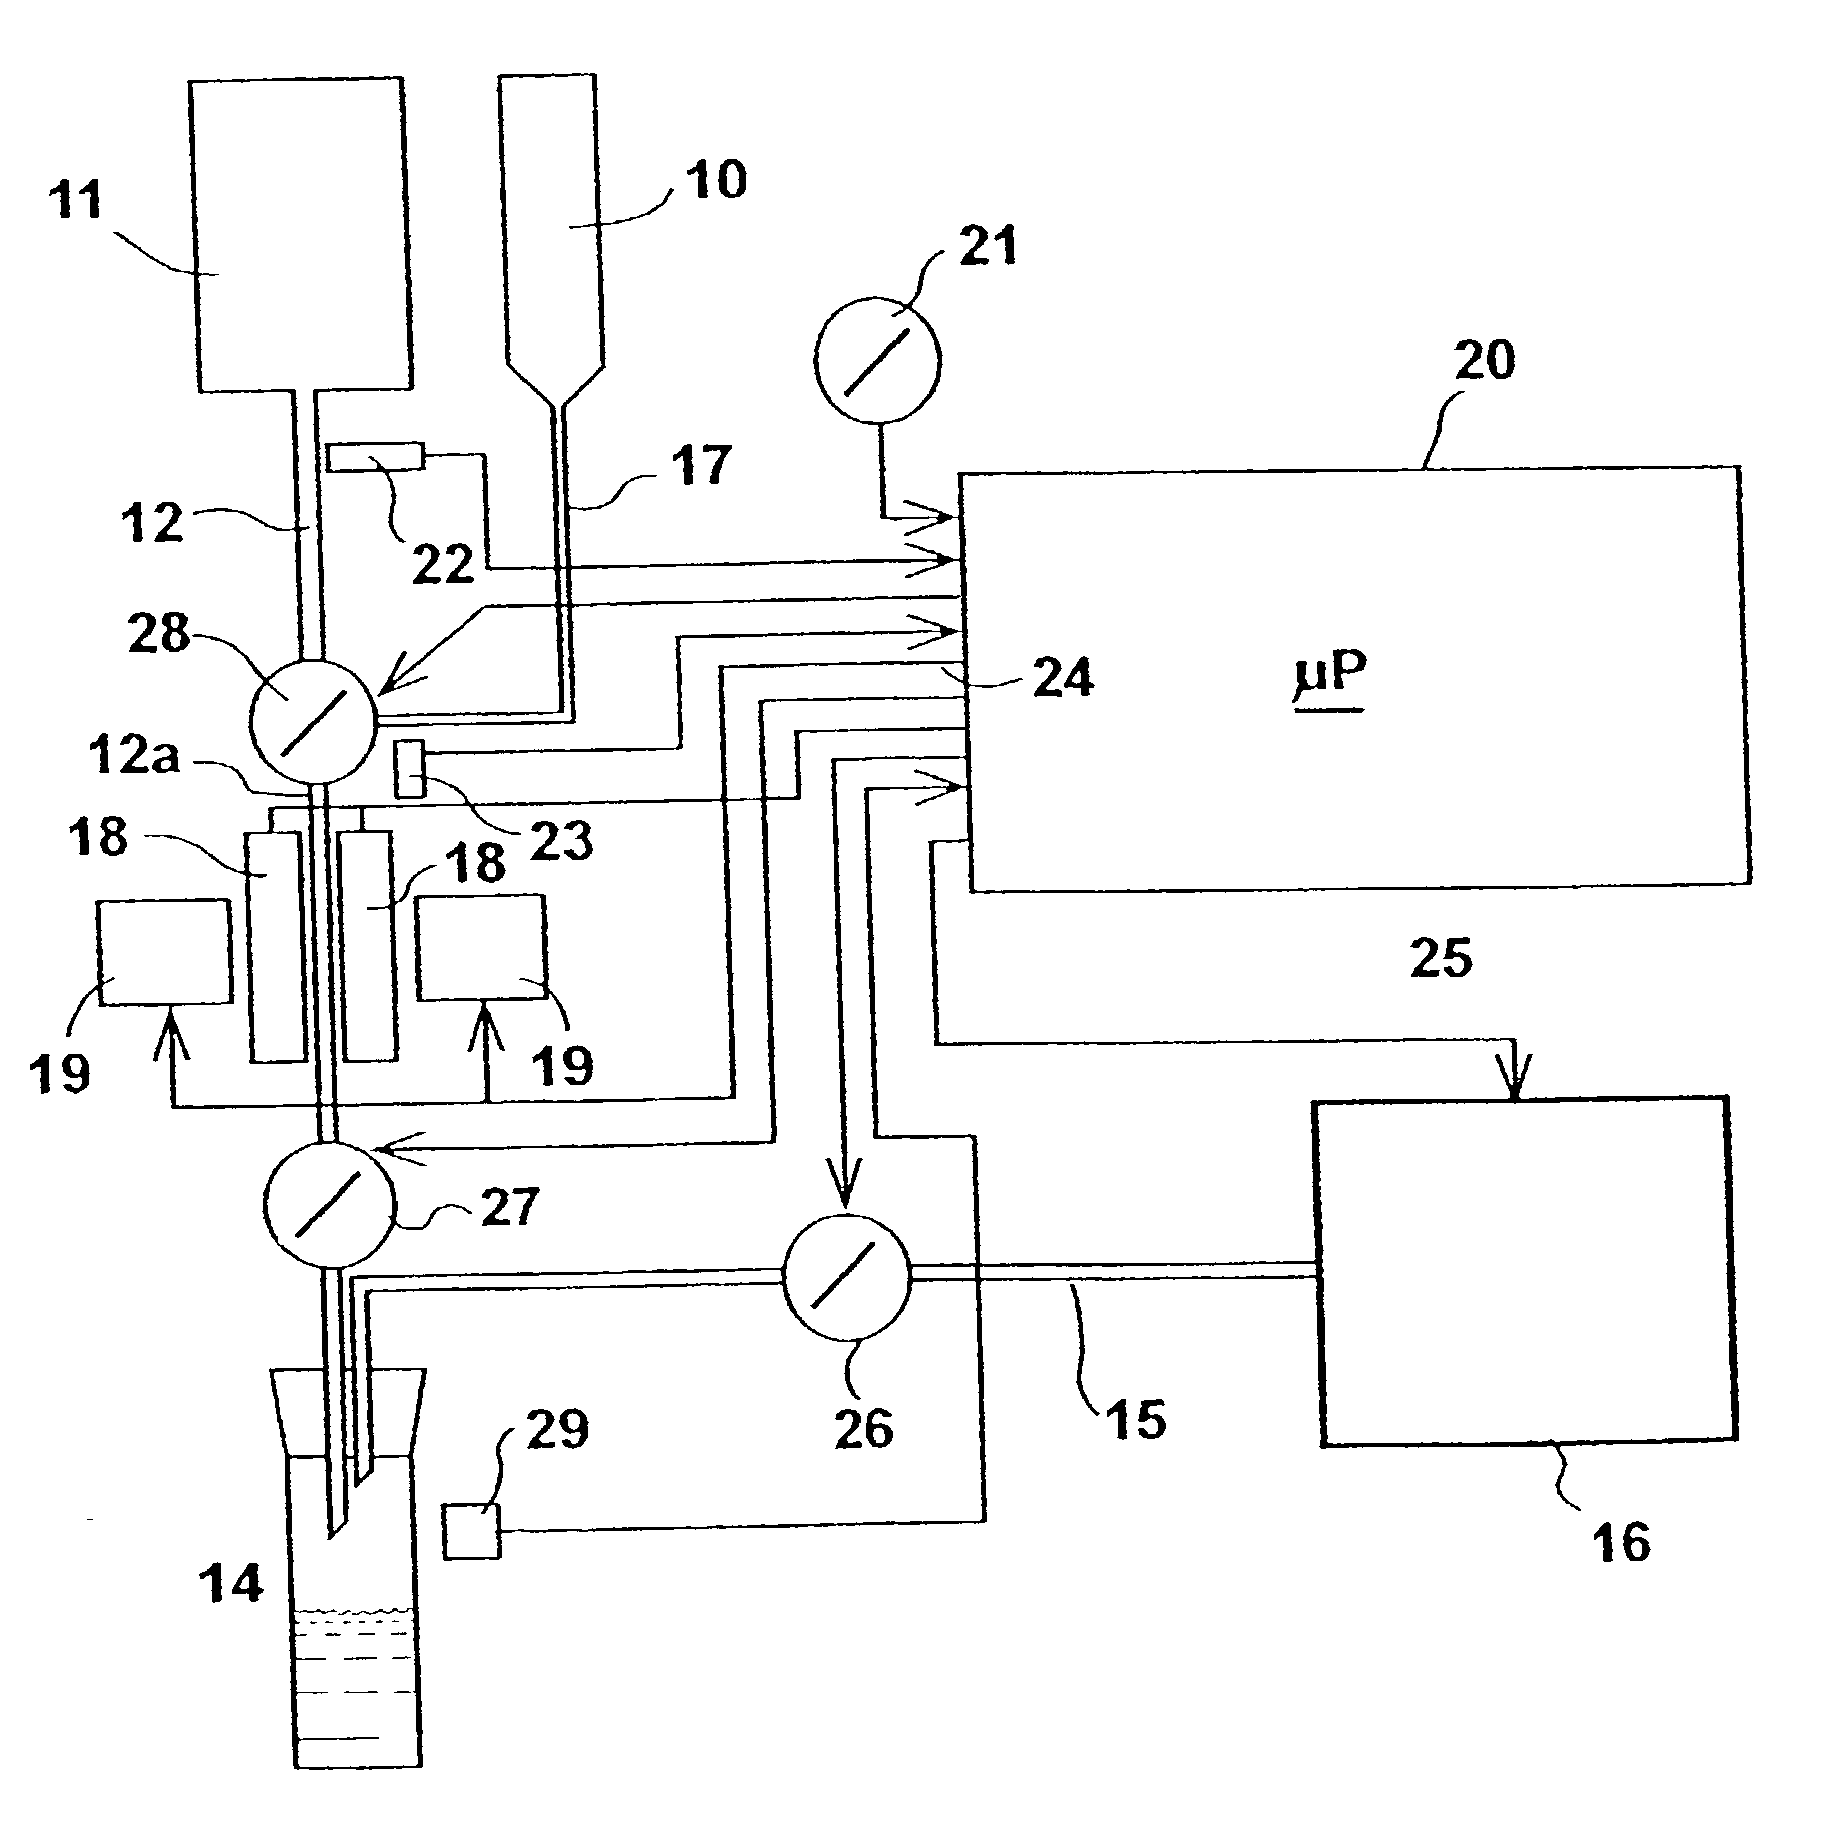 Method and apparatus for magnetically separating selected particles, particularly biological cells